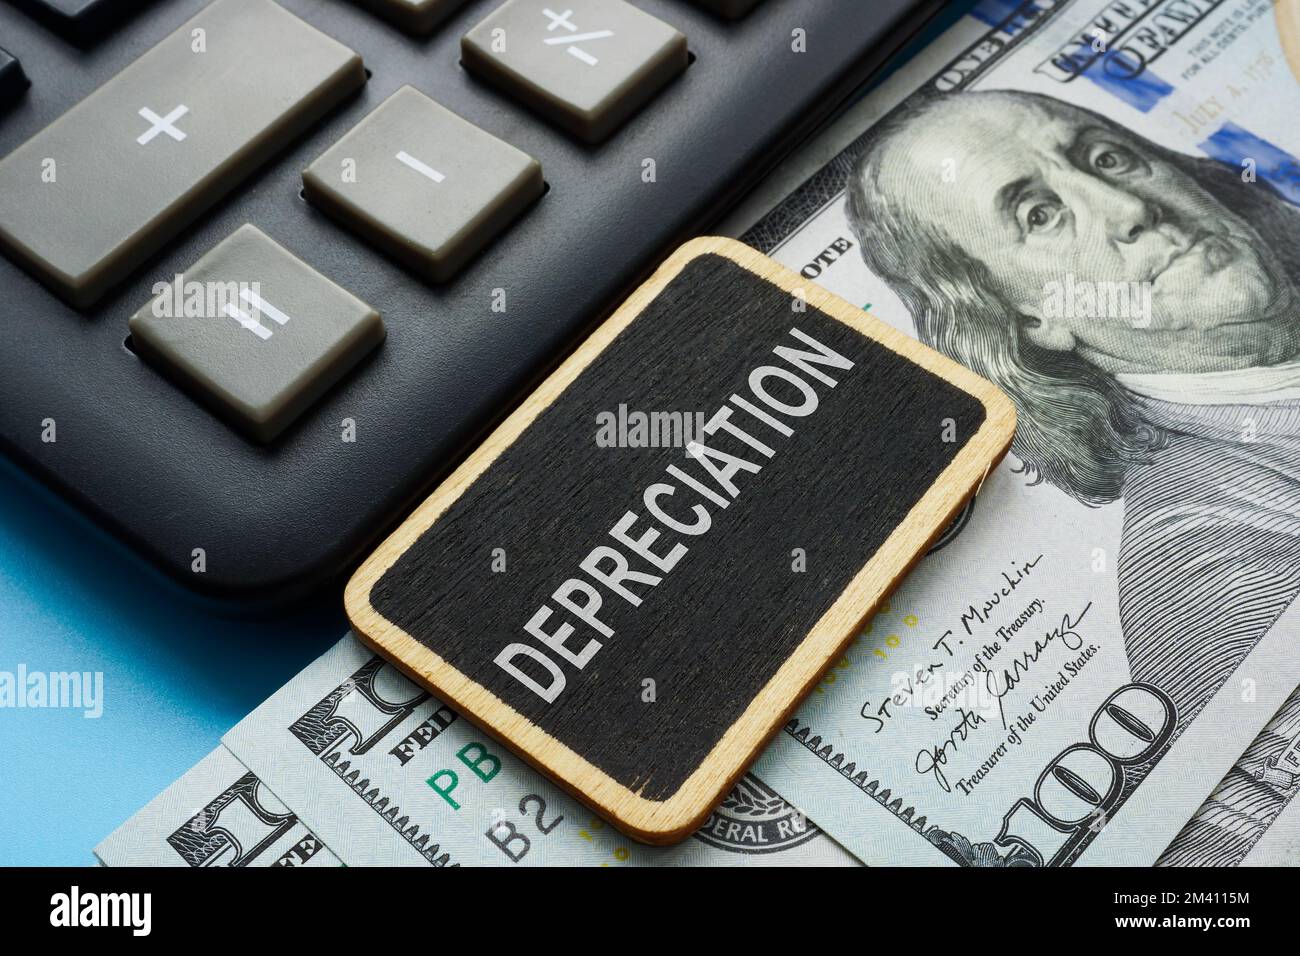 Plate with sign depreciation on the cash. Stock Photo